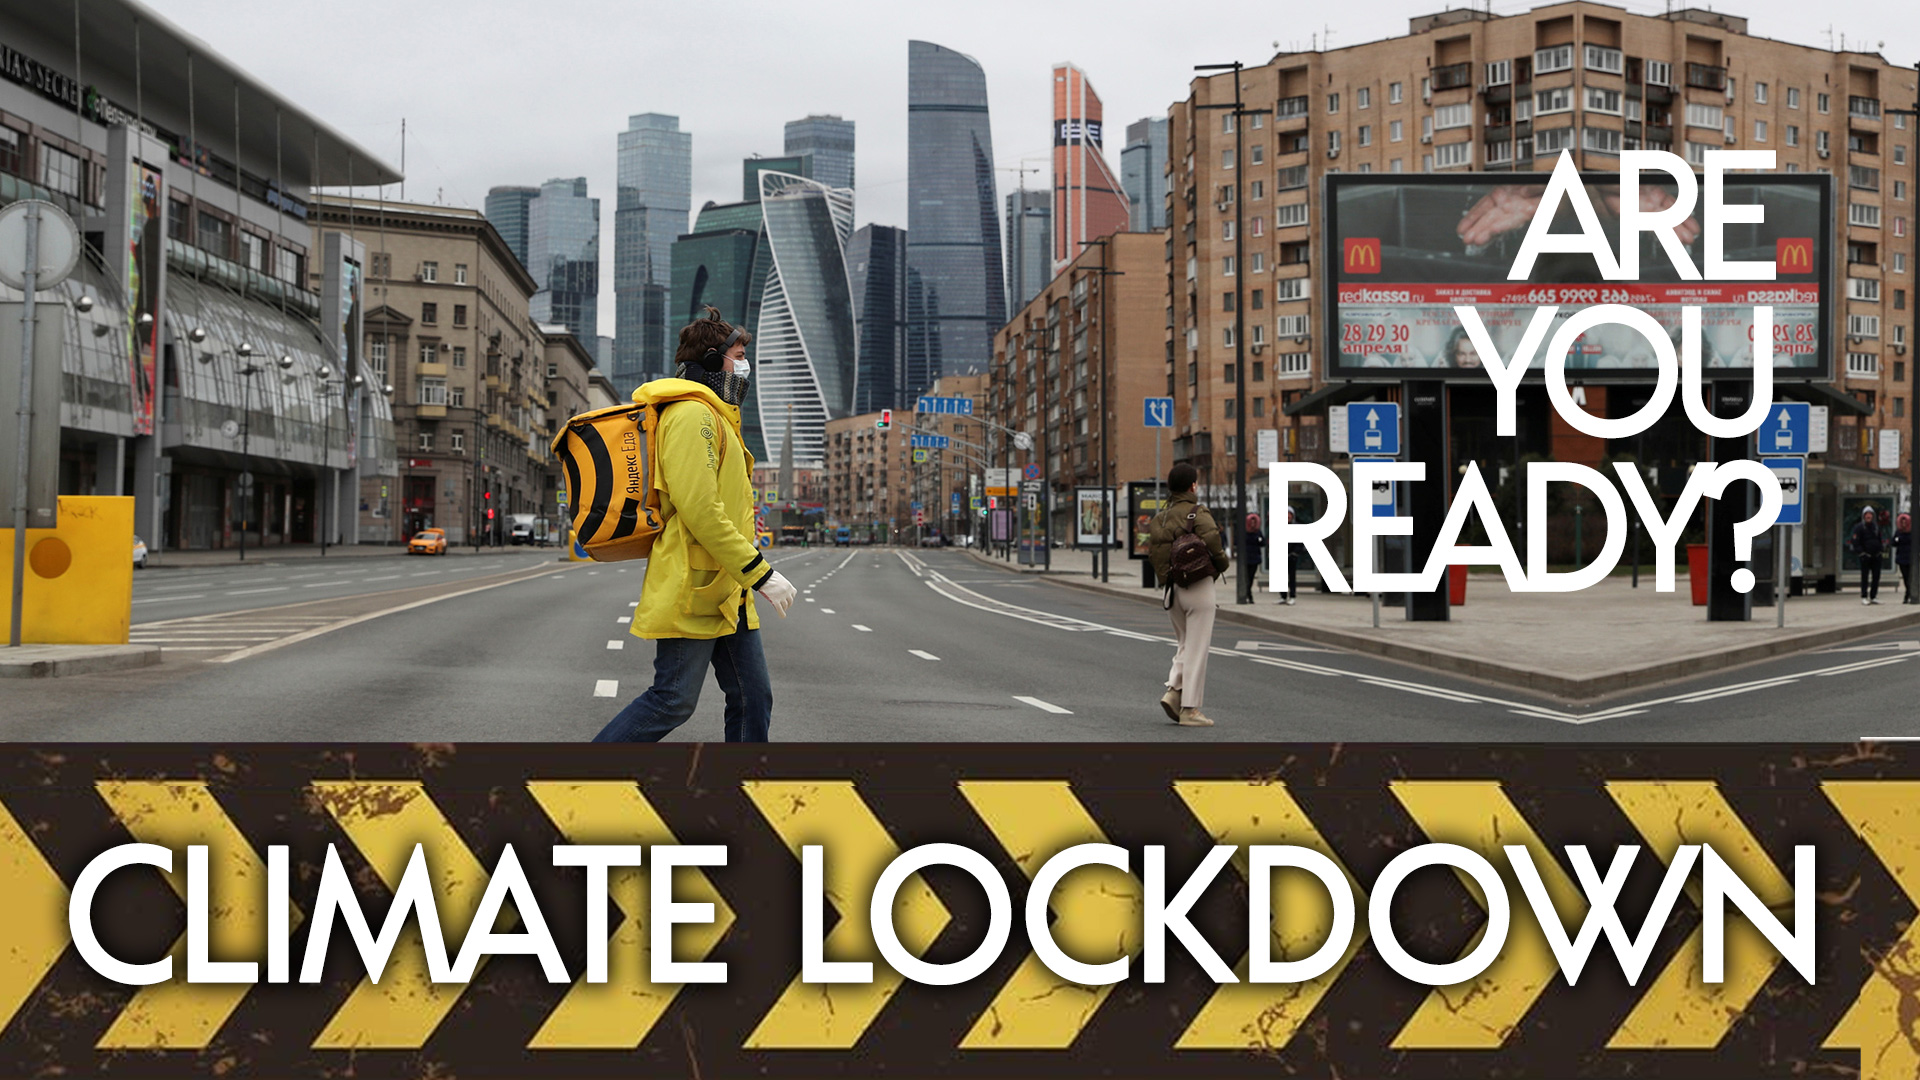 climate lockdown meaning